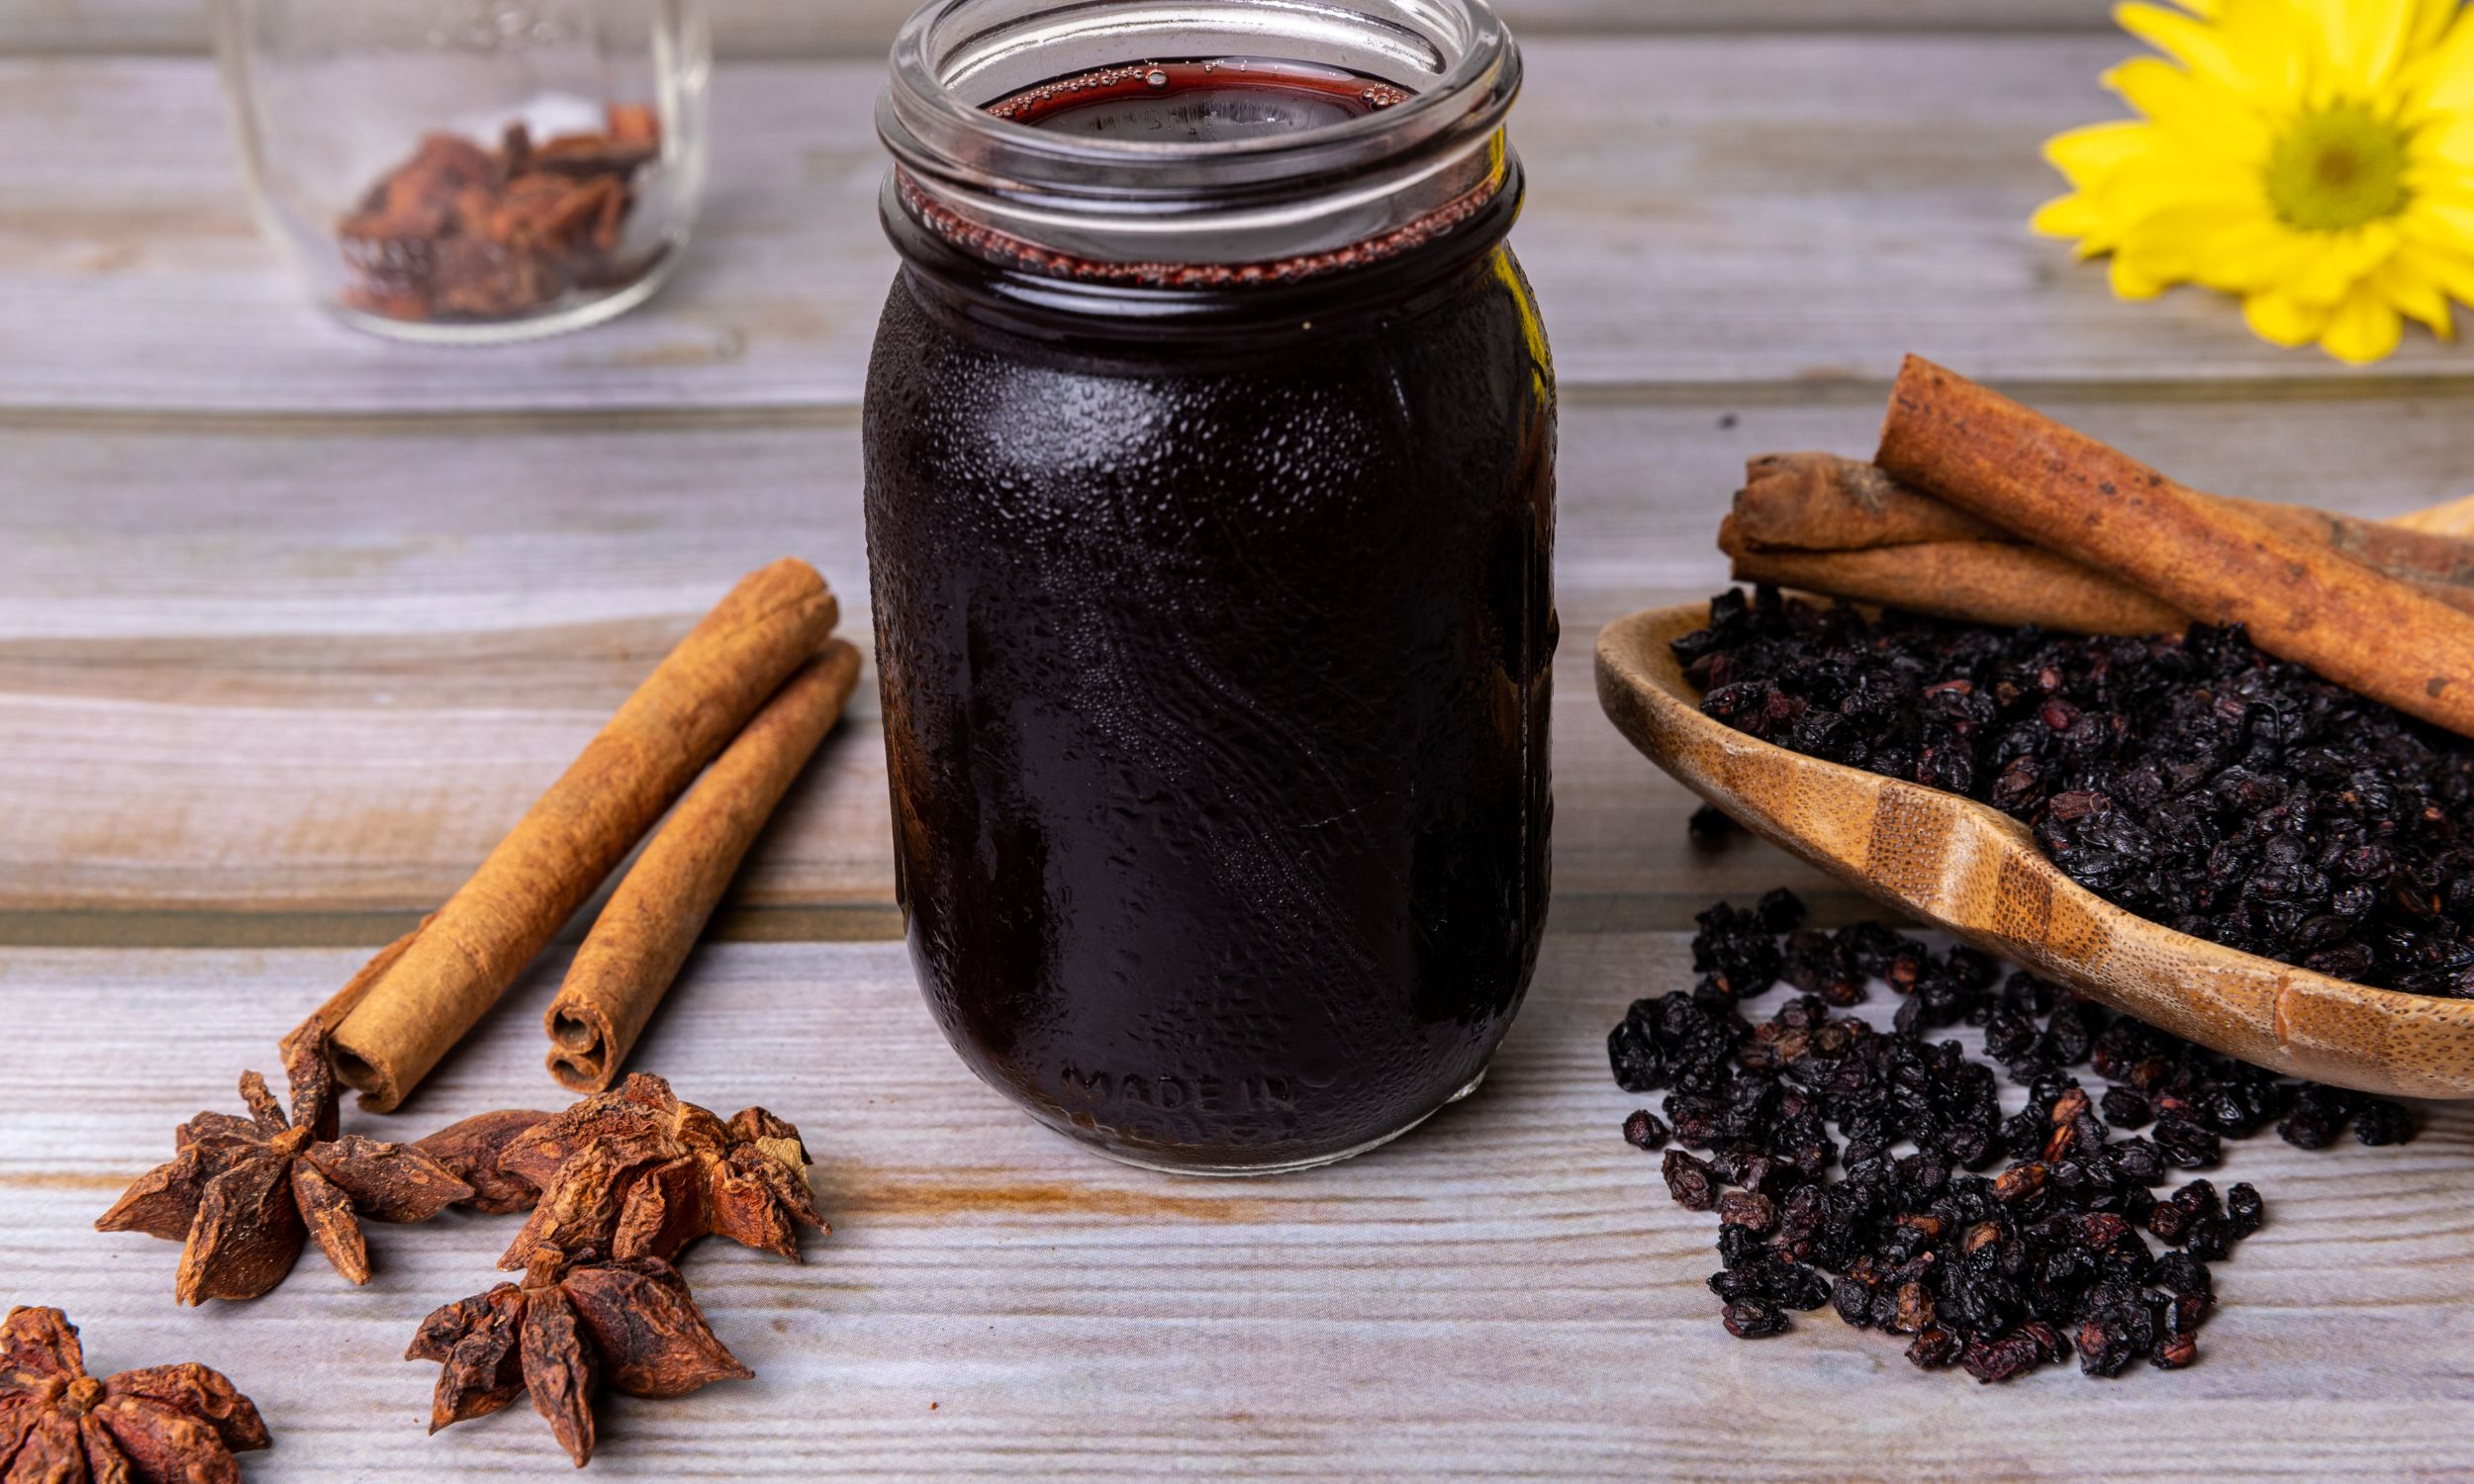 Benefits of Elderberry Syrup and How to Make it